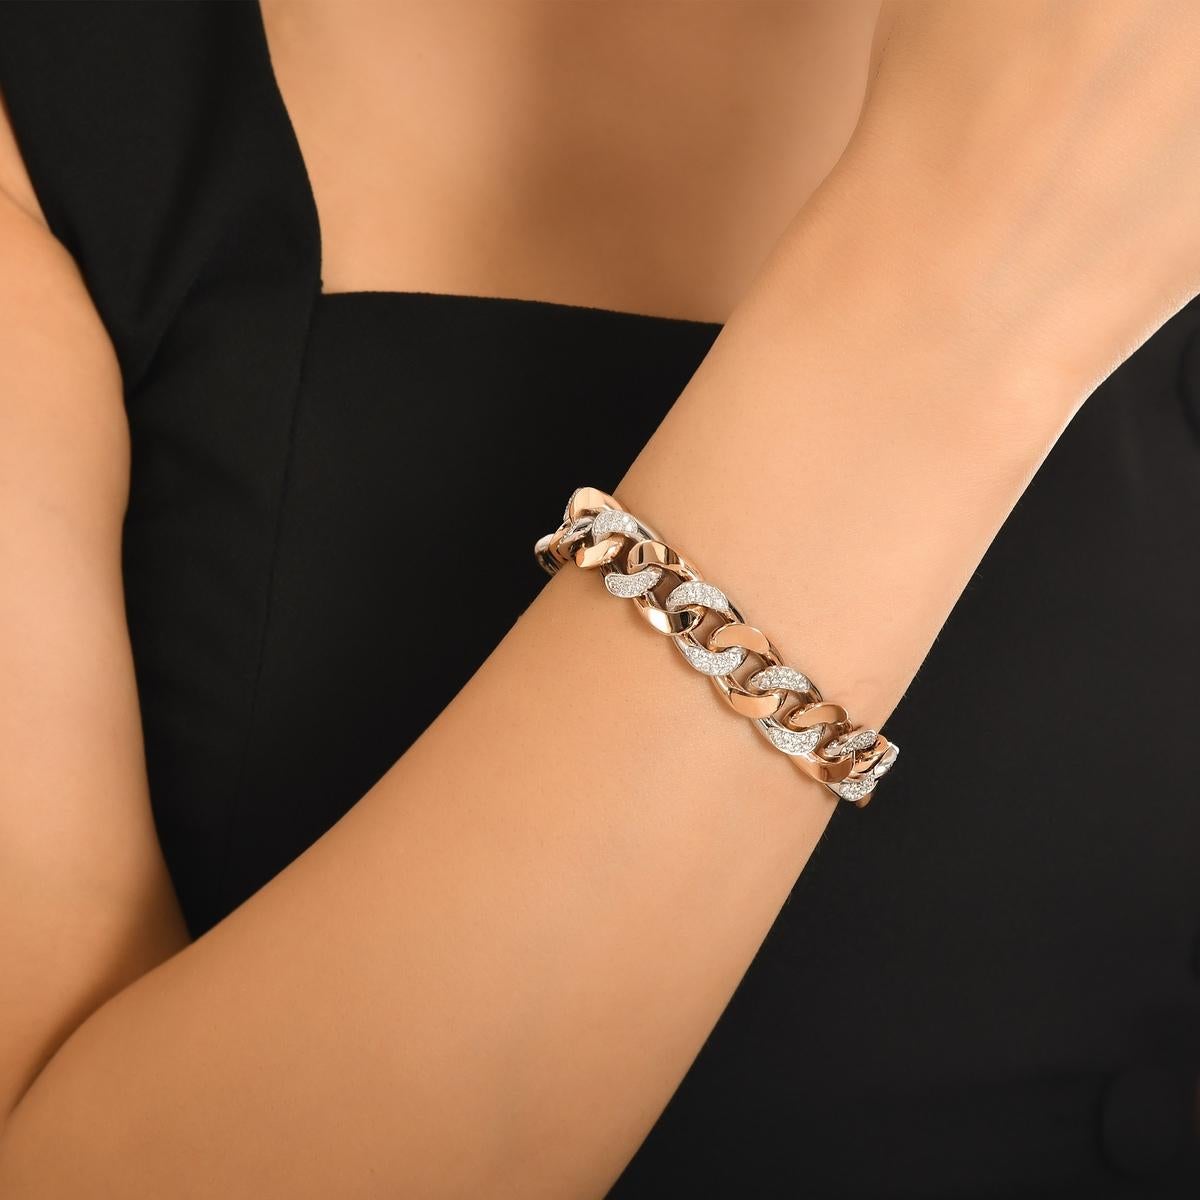 Artist Cuban Diamond Bracelet in White and Rose 18K Gold, Handcrafted in New York For Sale